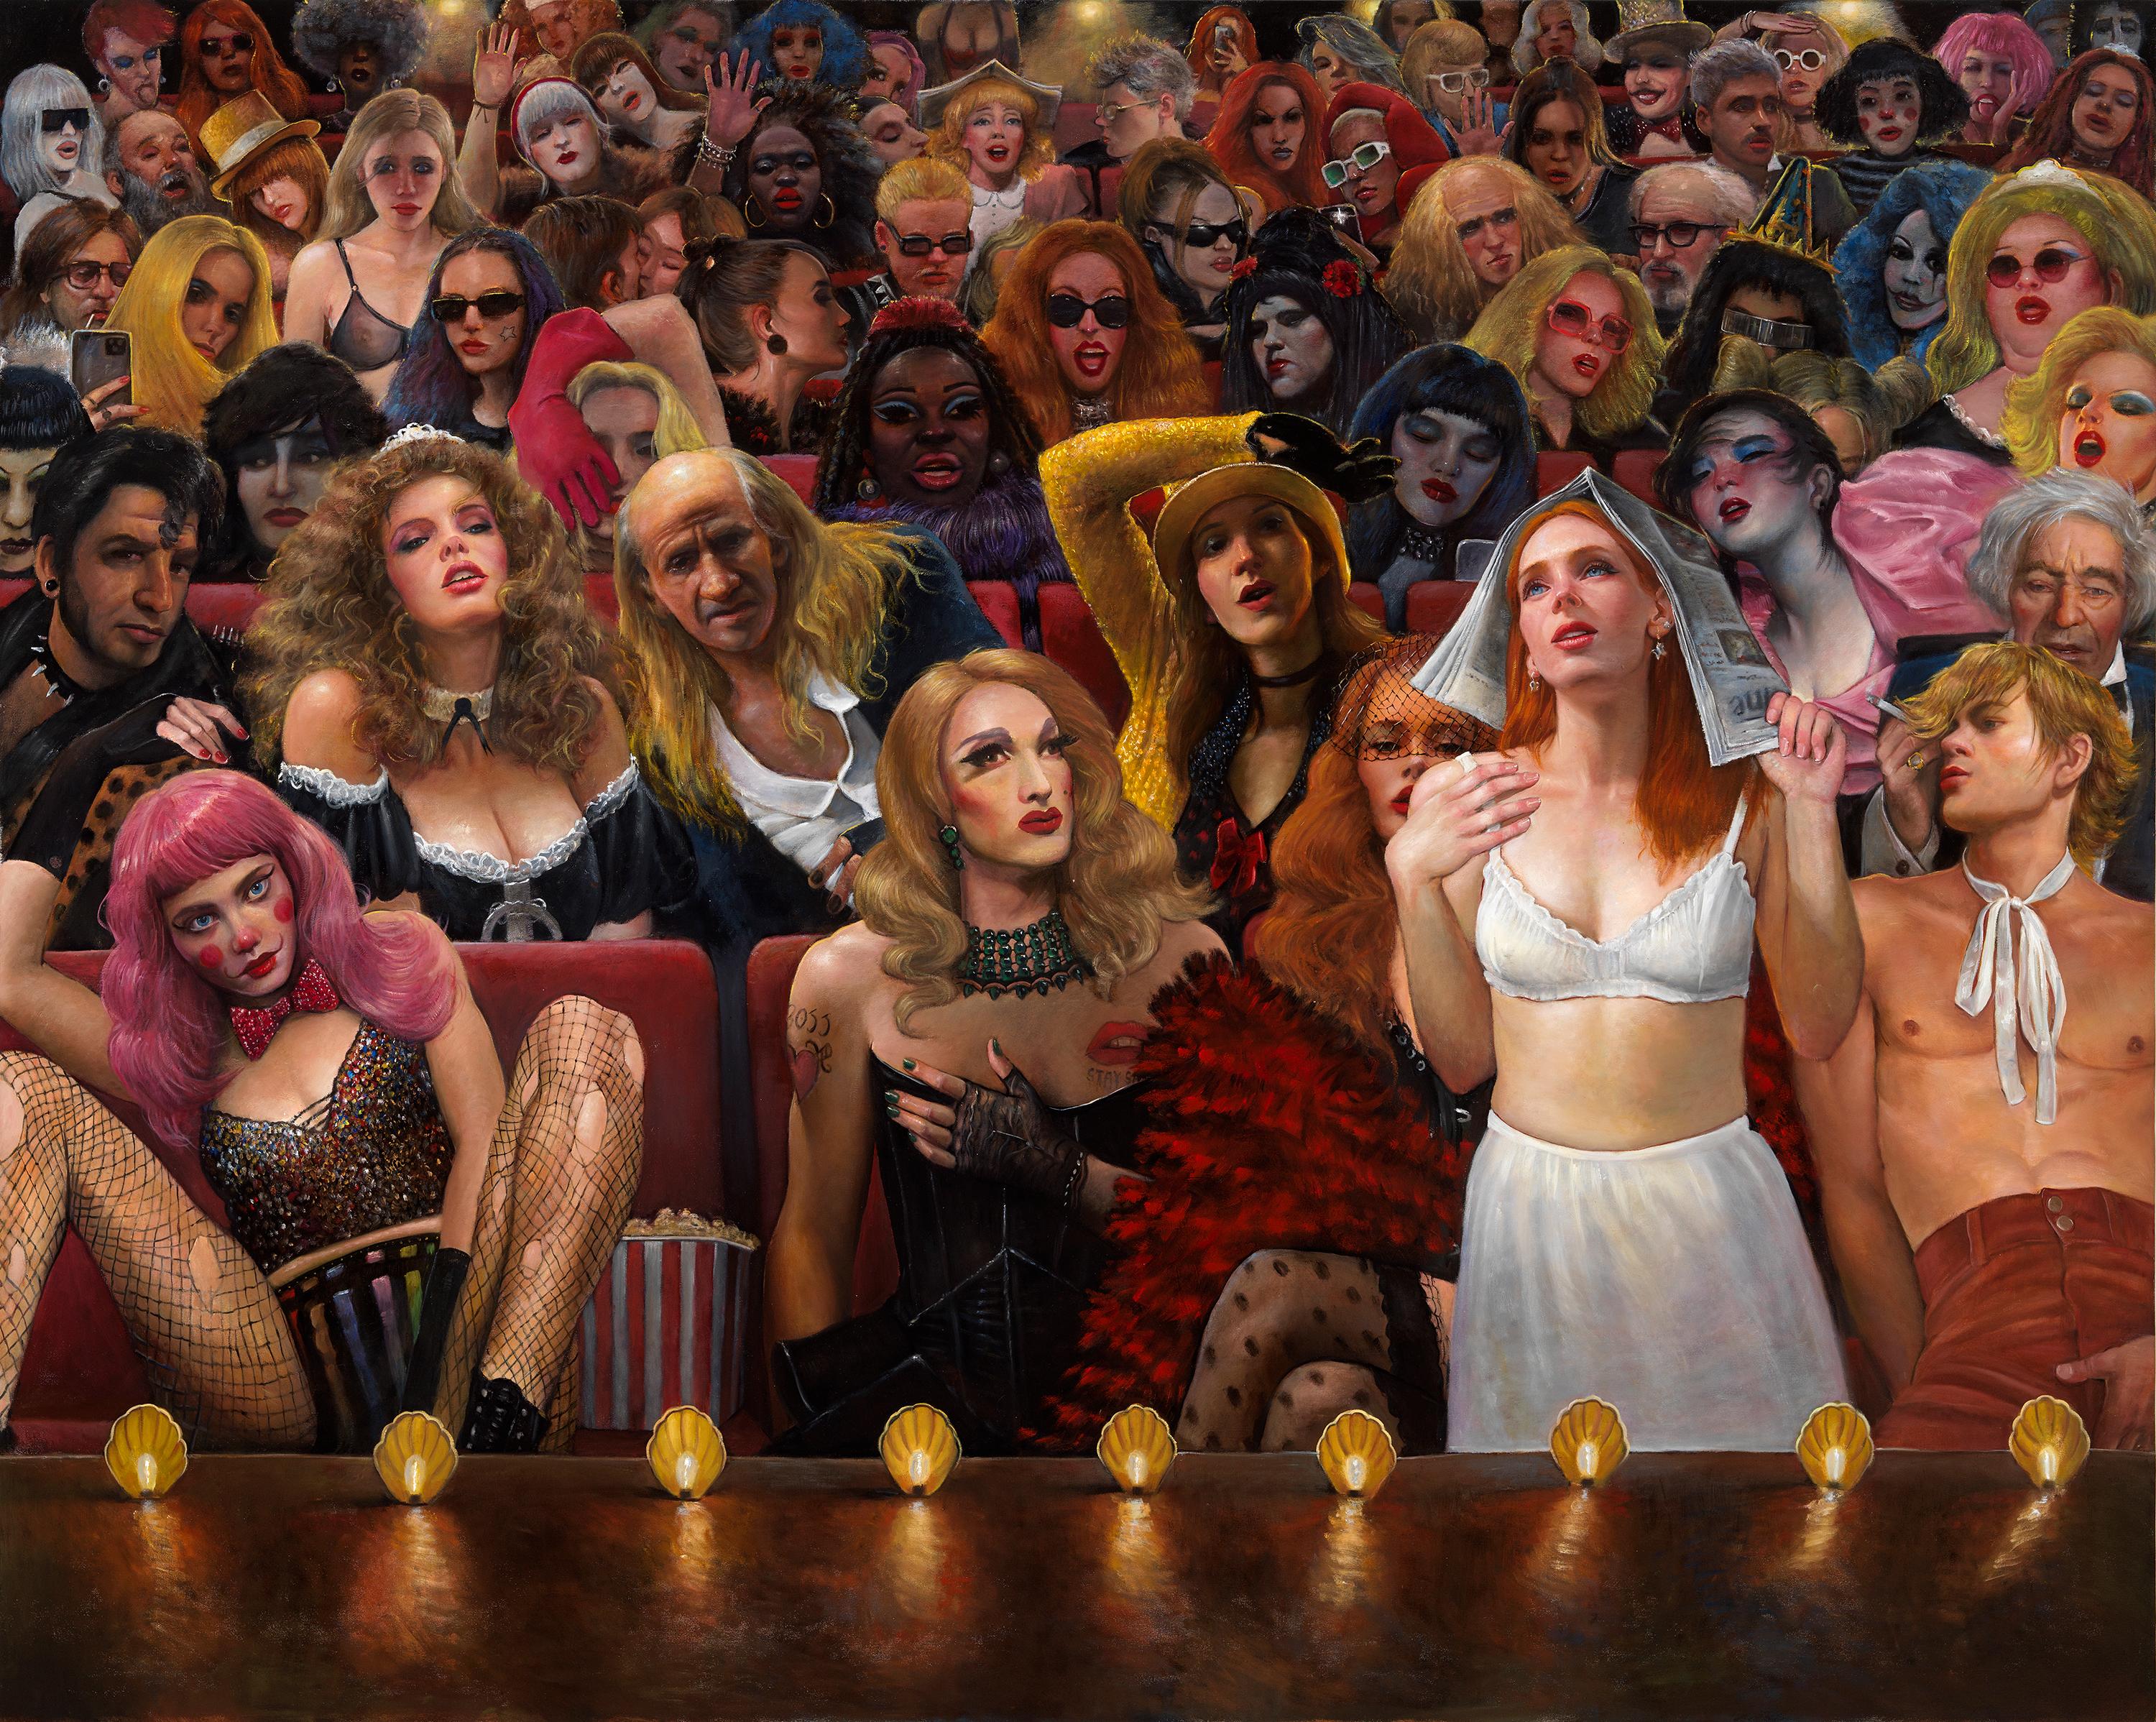 Figurative Painting Bruno Surdo - On Stage It's Okay to Be Different, un hommage au Rocky Horror Picture Show